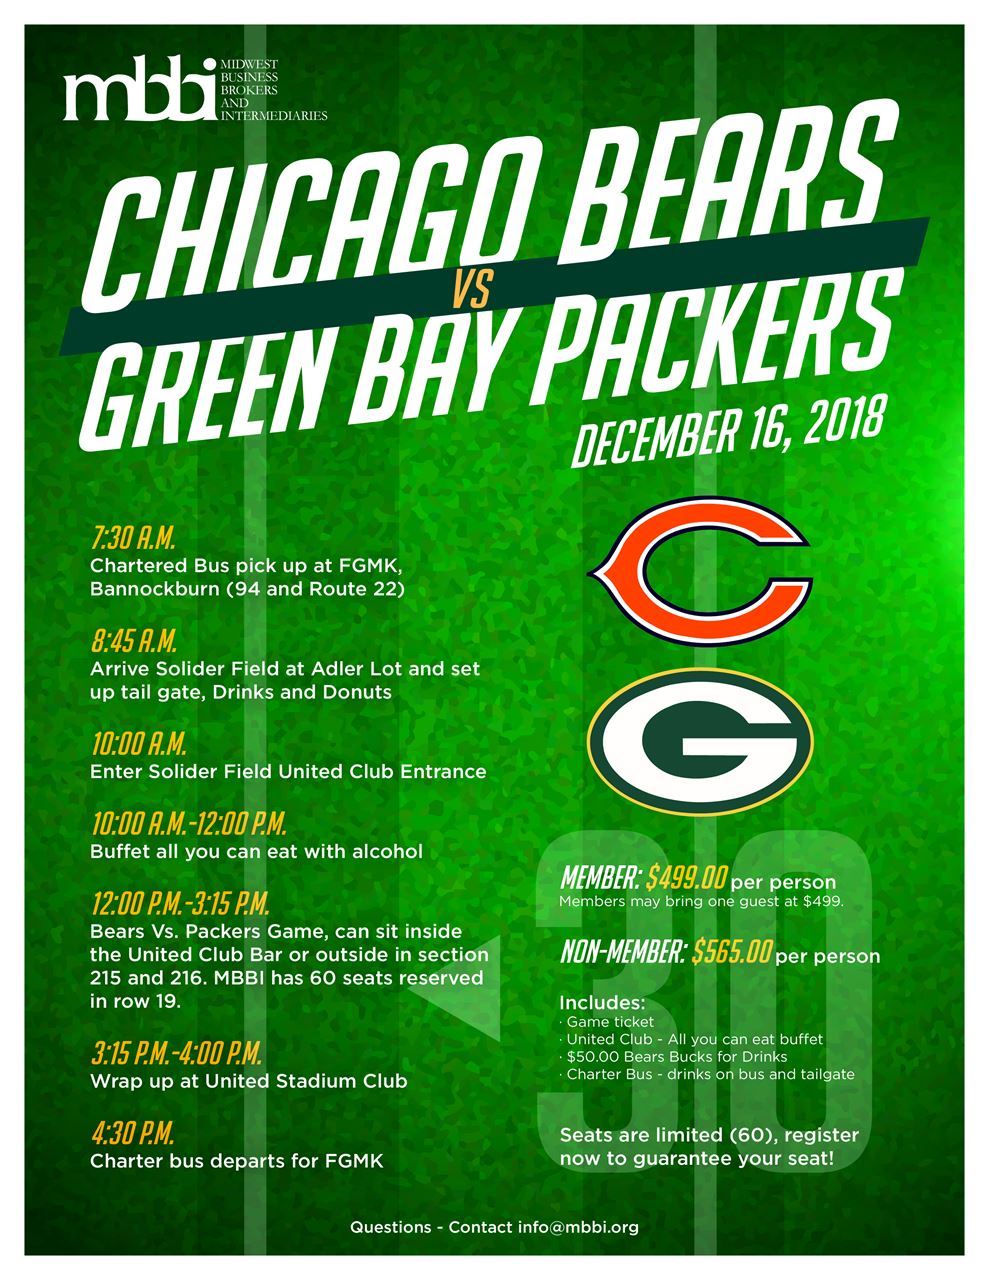 MBBI - MBBI Exclusive Event - Chicago Bears vs Green Bay Packers